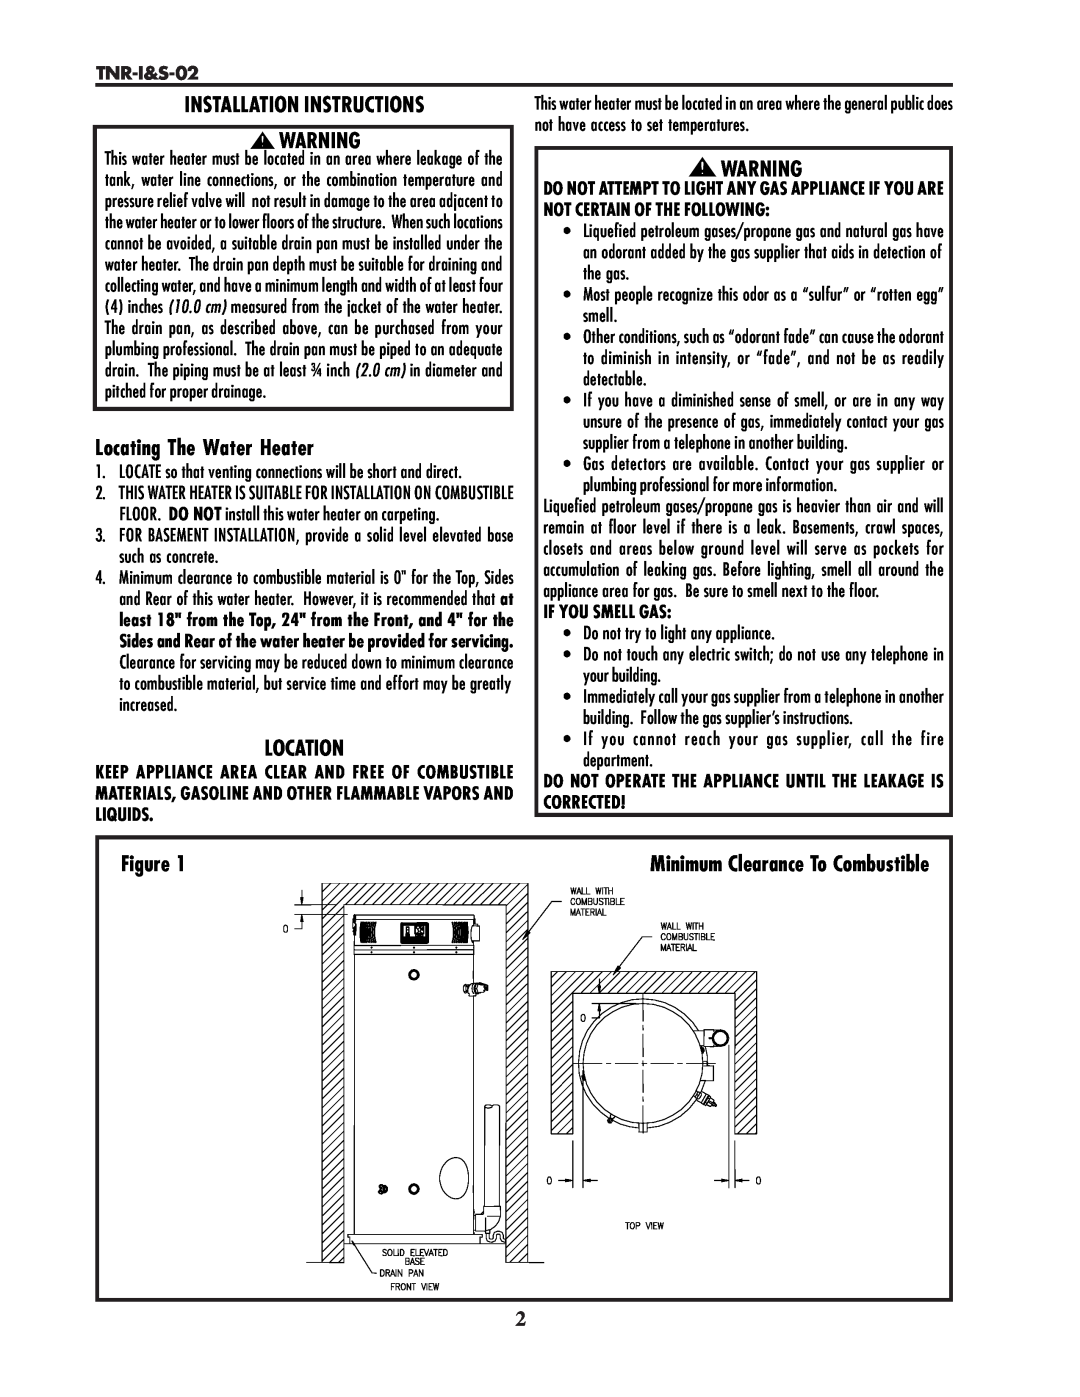 Lochinvar TNR-I&S-02 Installation Instructions, Locating The Water Heater, Location, Minimum Clearance To Combustible 